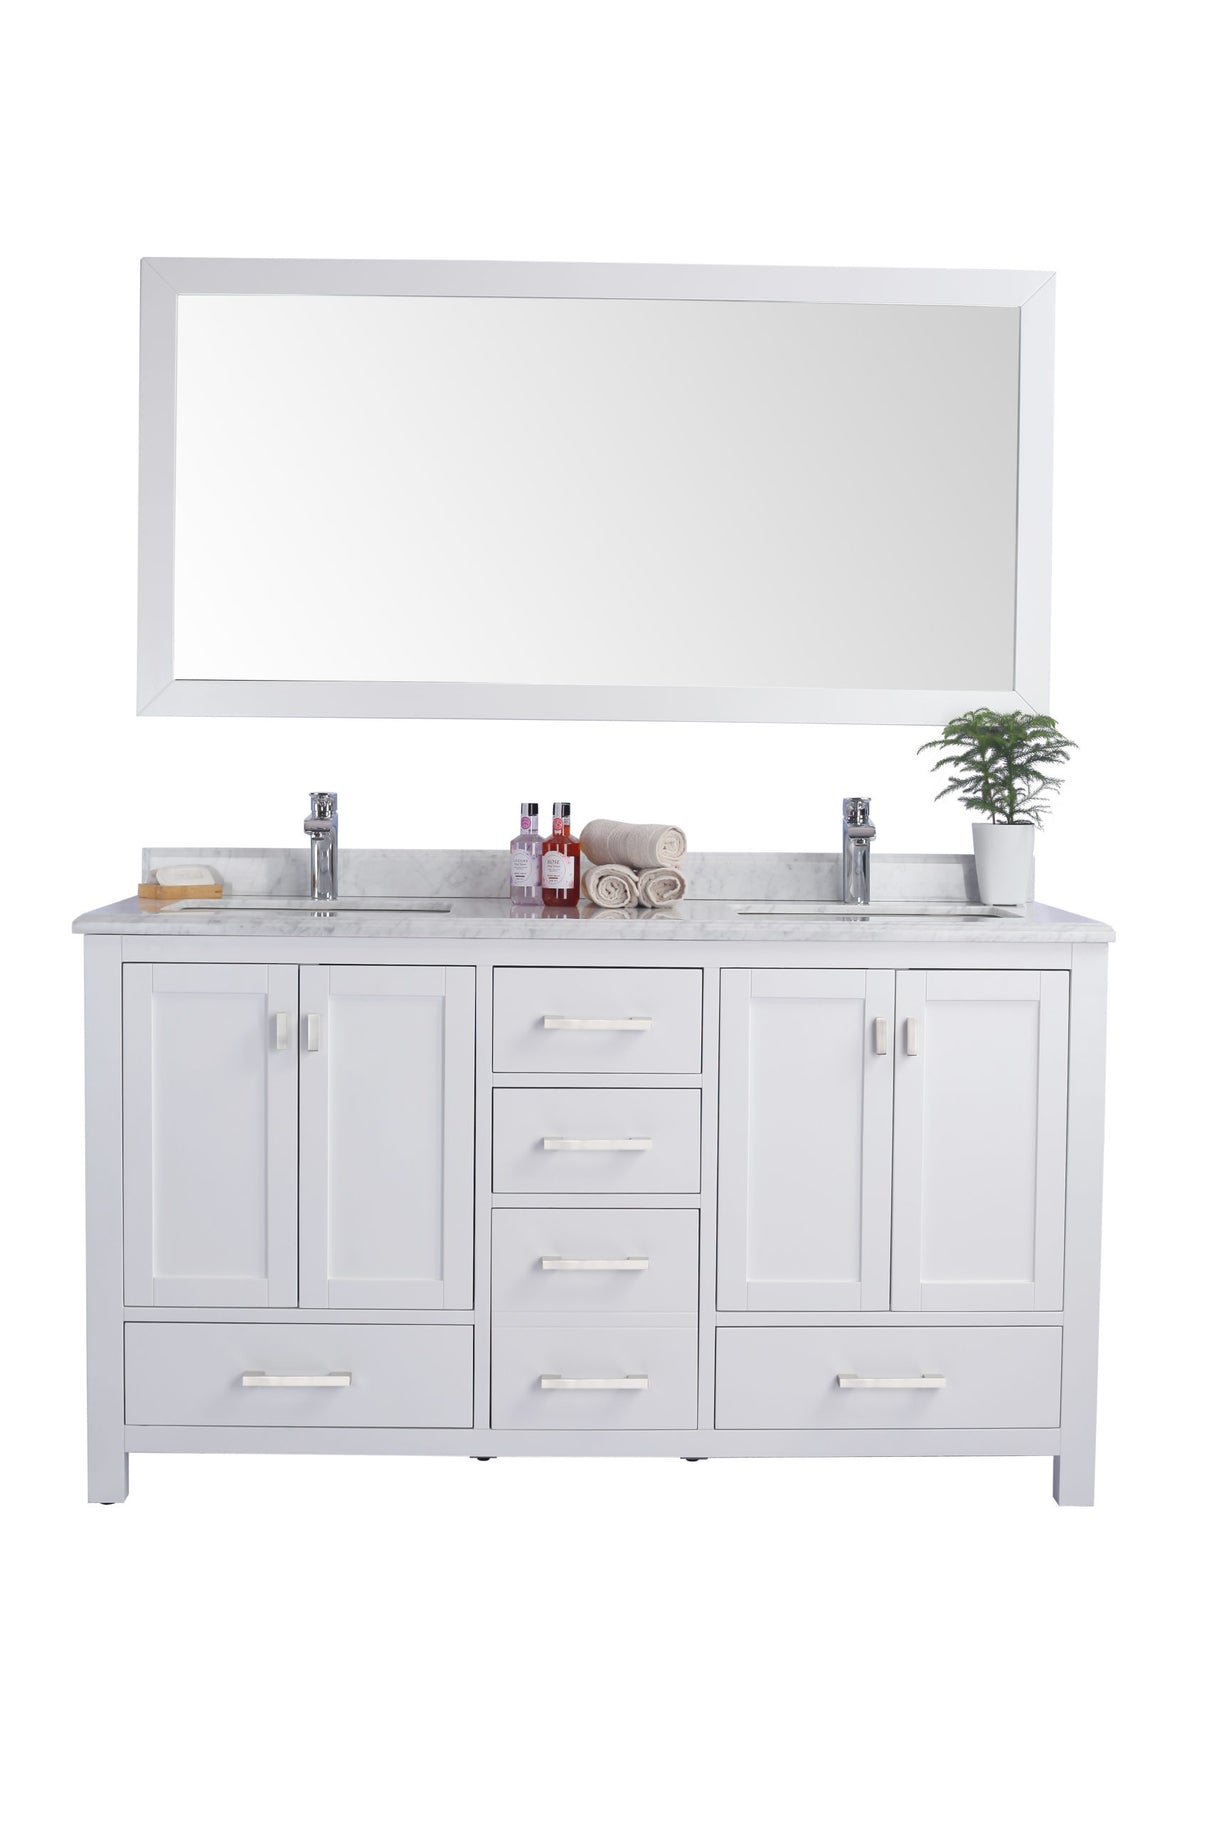 Wilson 60" White Double Sink Bathroom Vanity with White Carrara Marble Countertop Laviva 313ANG-60W-WC